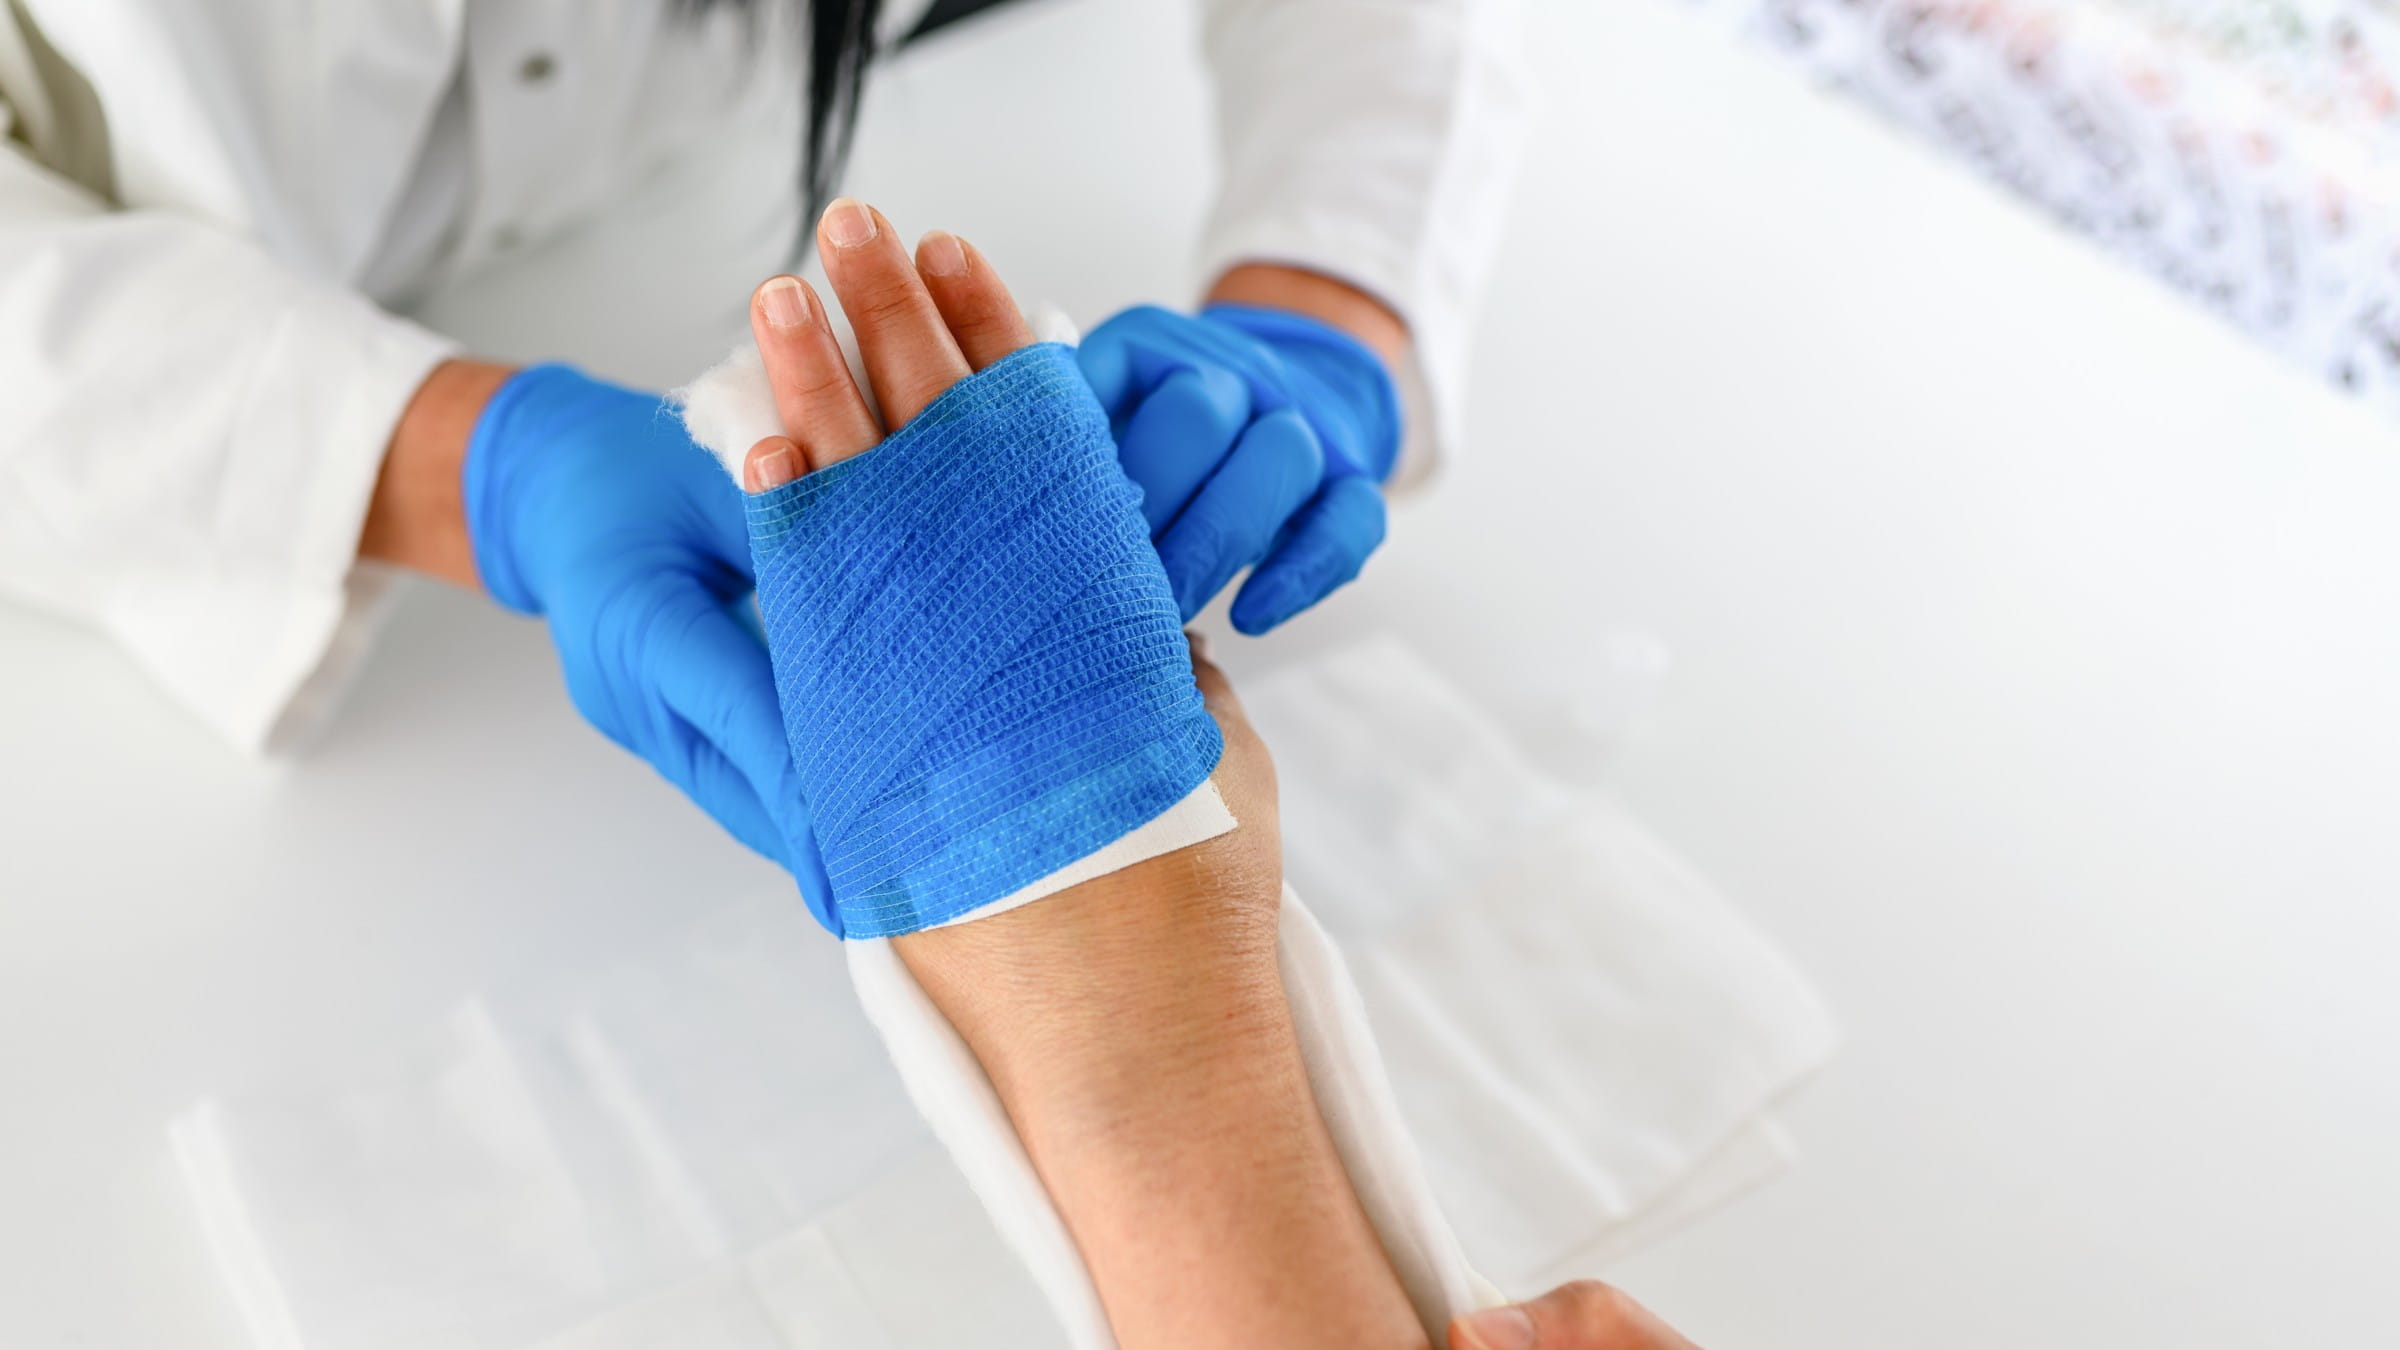 Wound Care: 4 Tips for Taking Care of Stitches - Complete Care